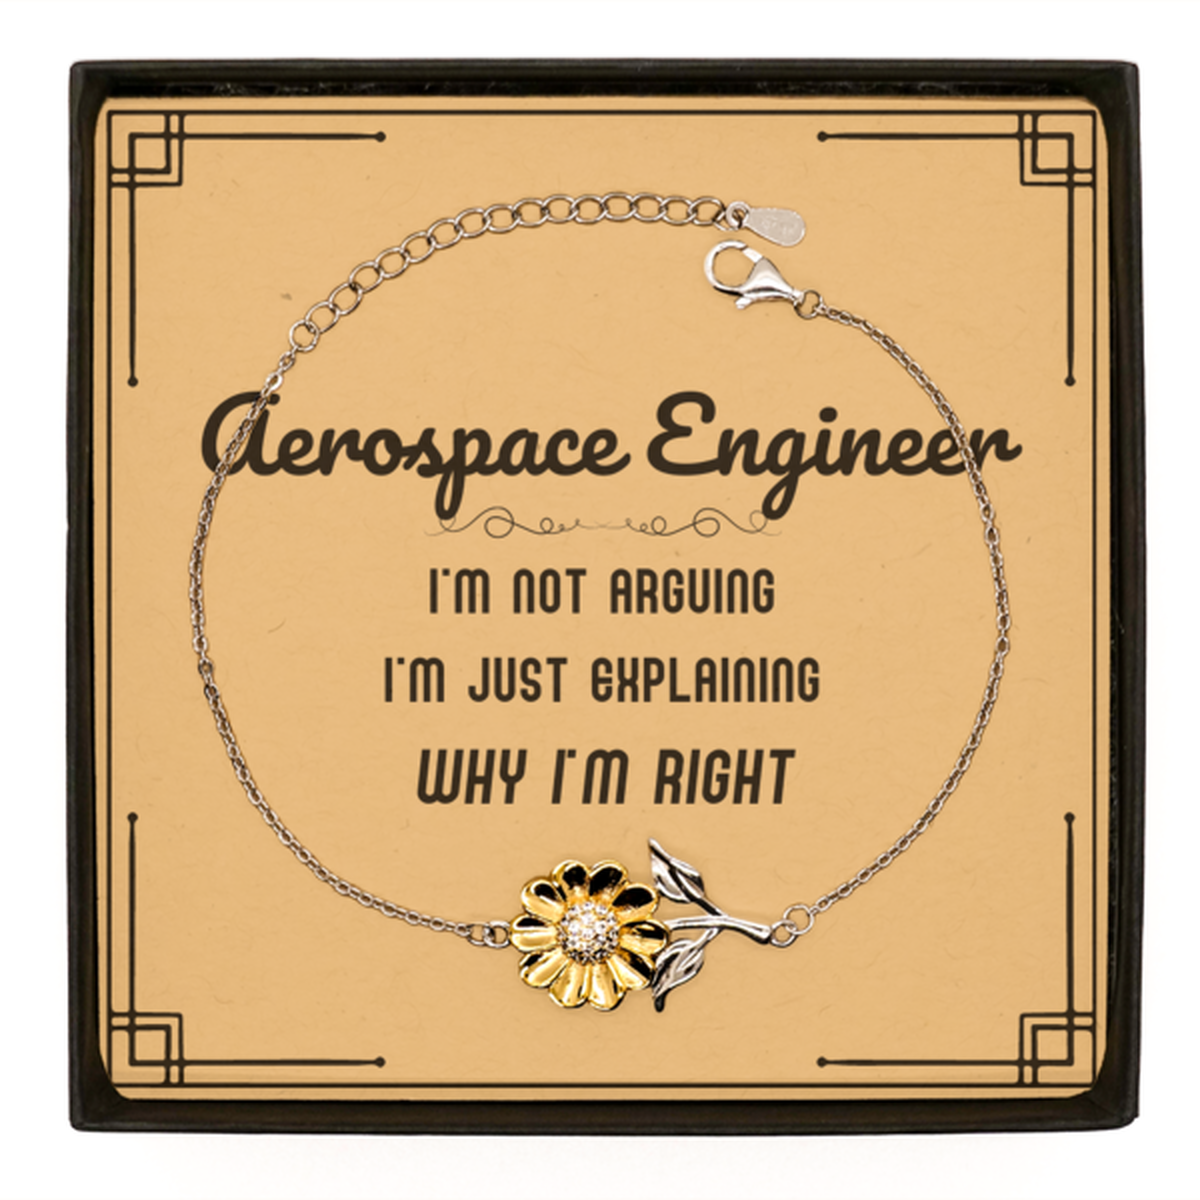 Aerospace Engineer I'm not Arguing. I'm Just Explaining Why I'm RIGHT Sunflower Bracelet, Funny Saying Quote Aerospace Engineer Gifts For Aerospace Engineer Message Card Graduation Birthday Christmas Gifts for Men Women Coworker